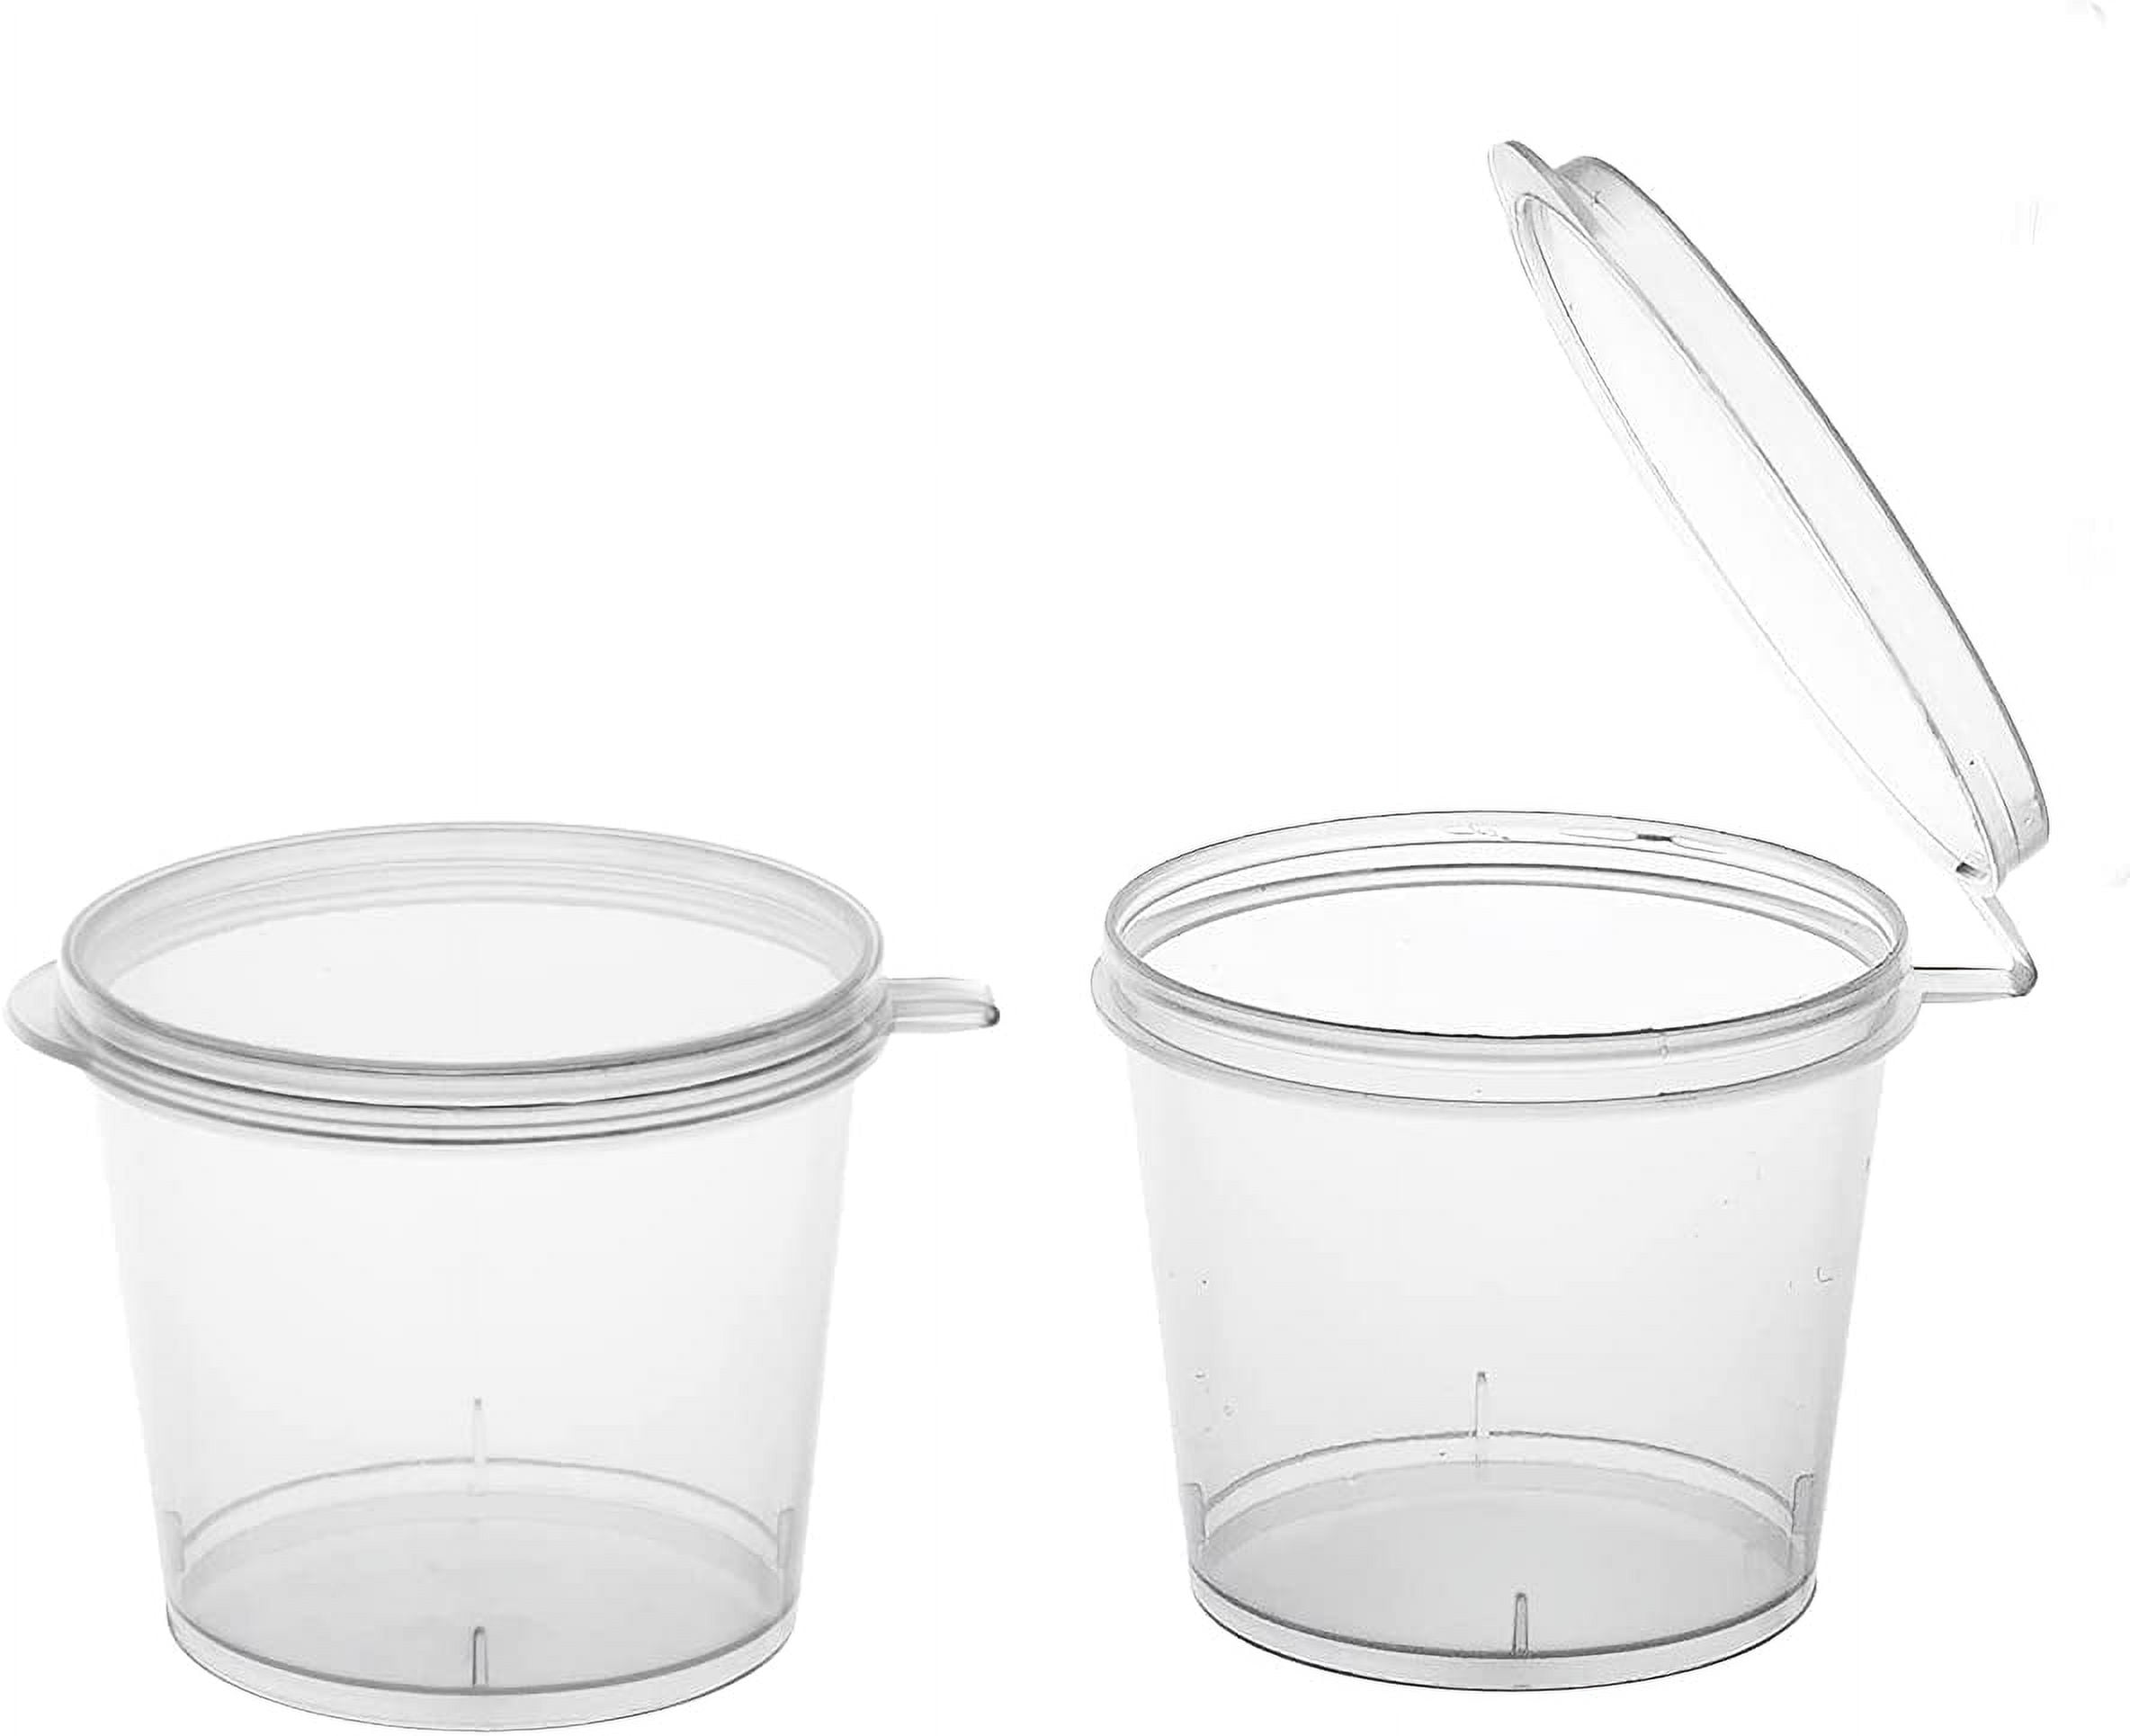 2oz Disposable Leak Proof Plastic Condiment Containers with Hinged Lid –  EcoQuality Store